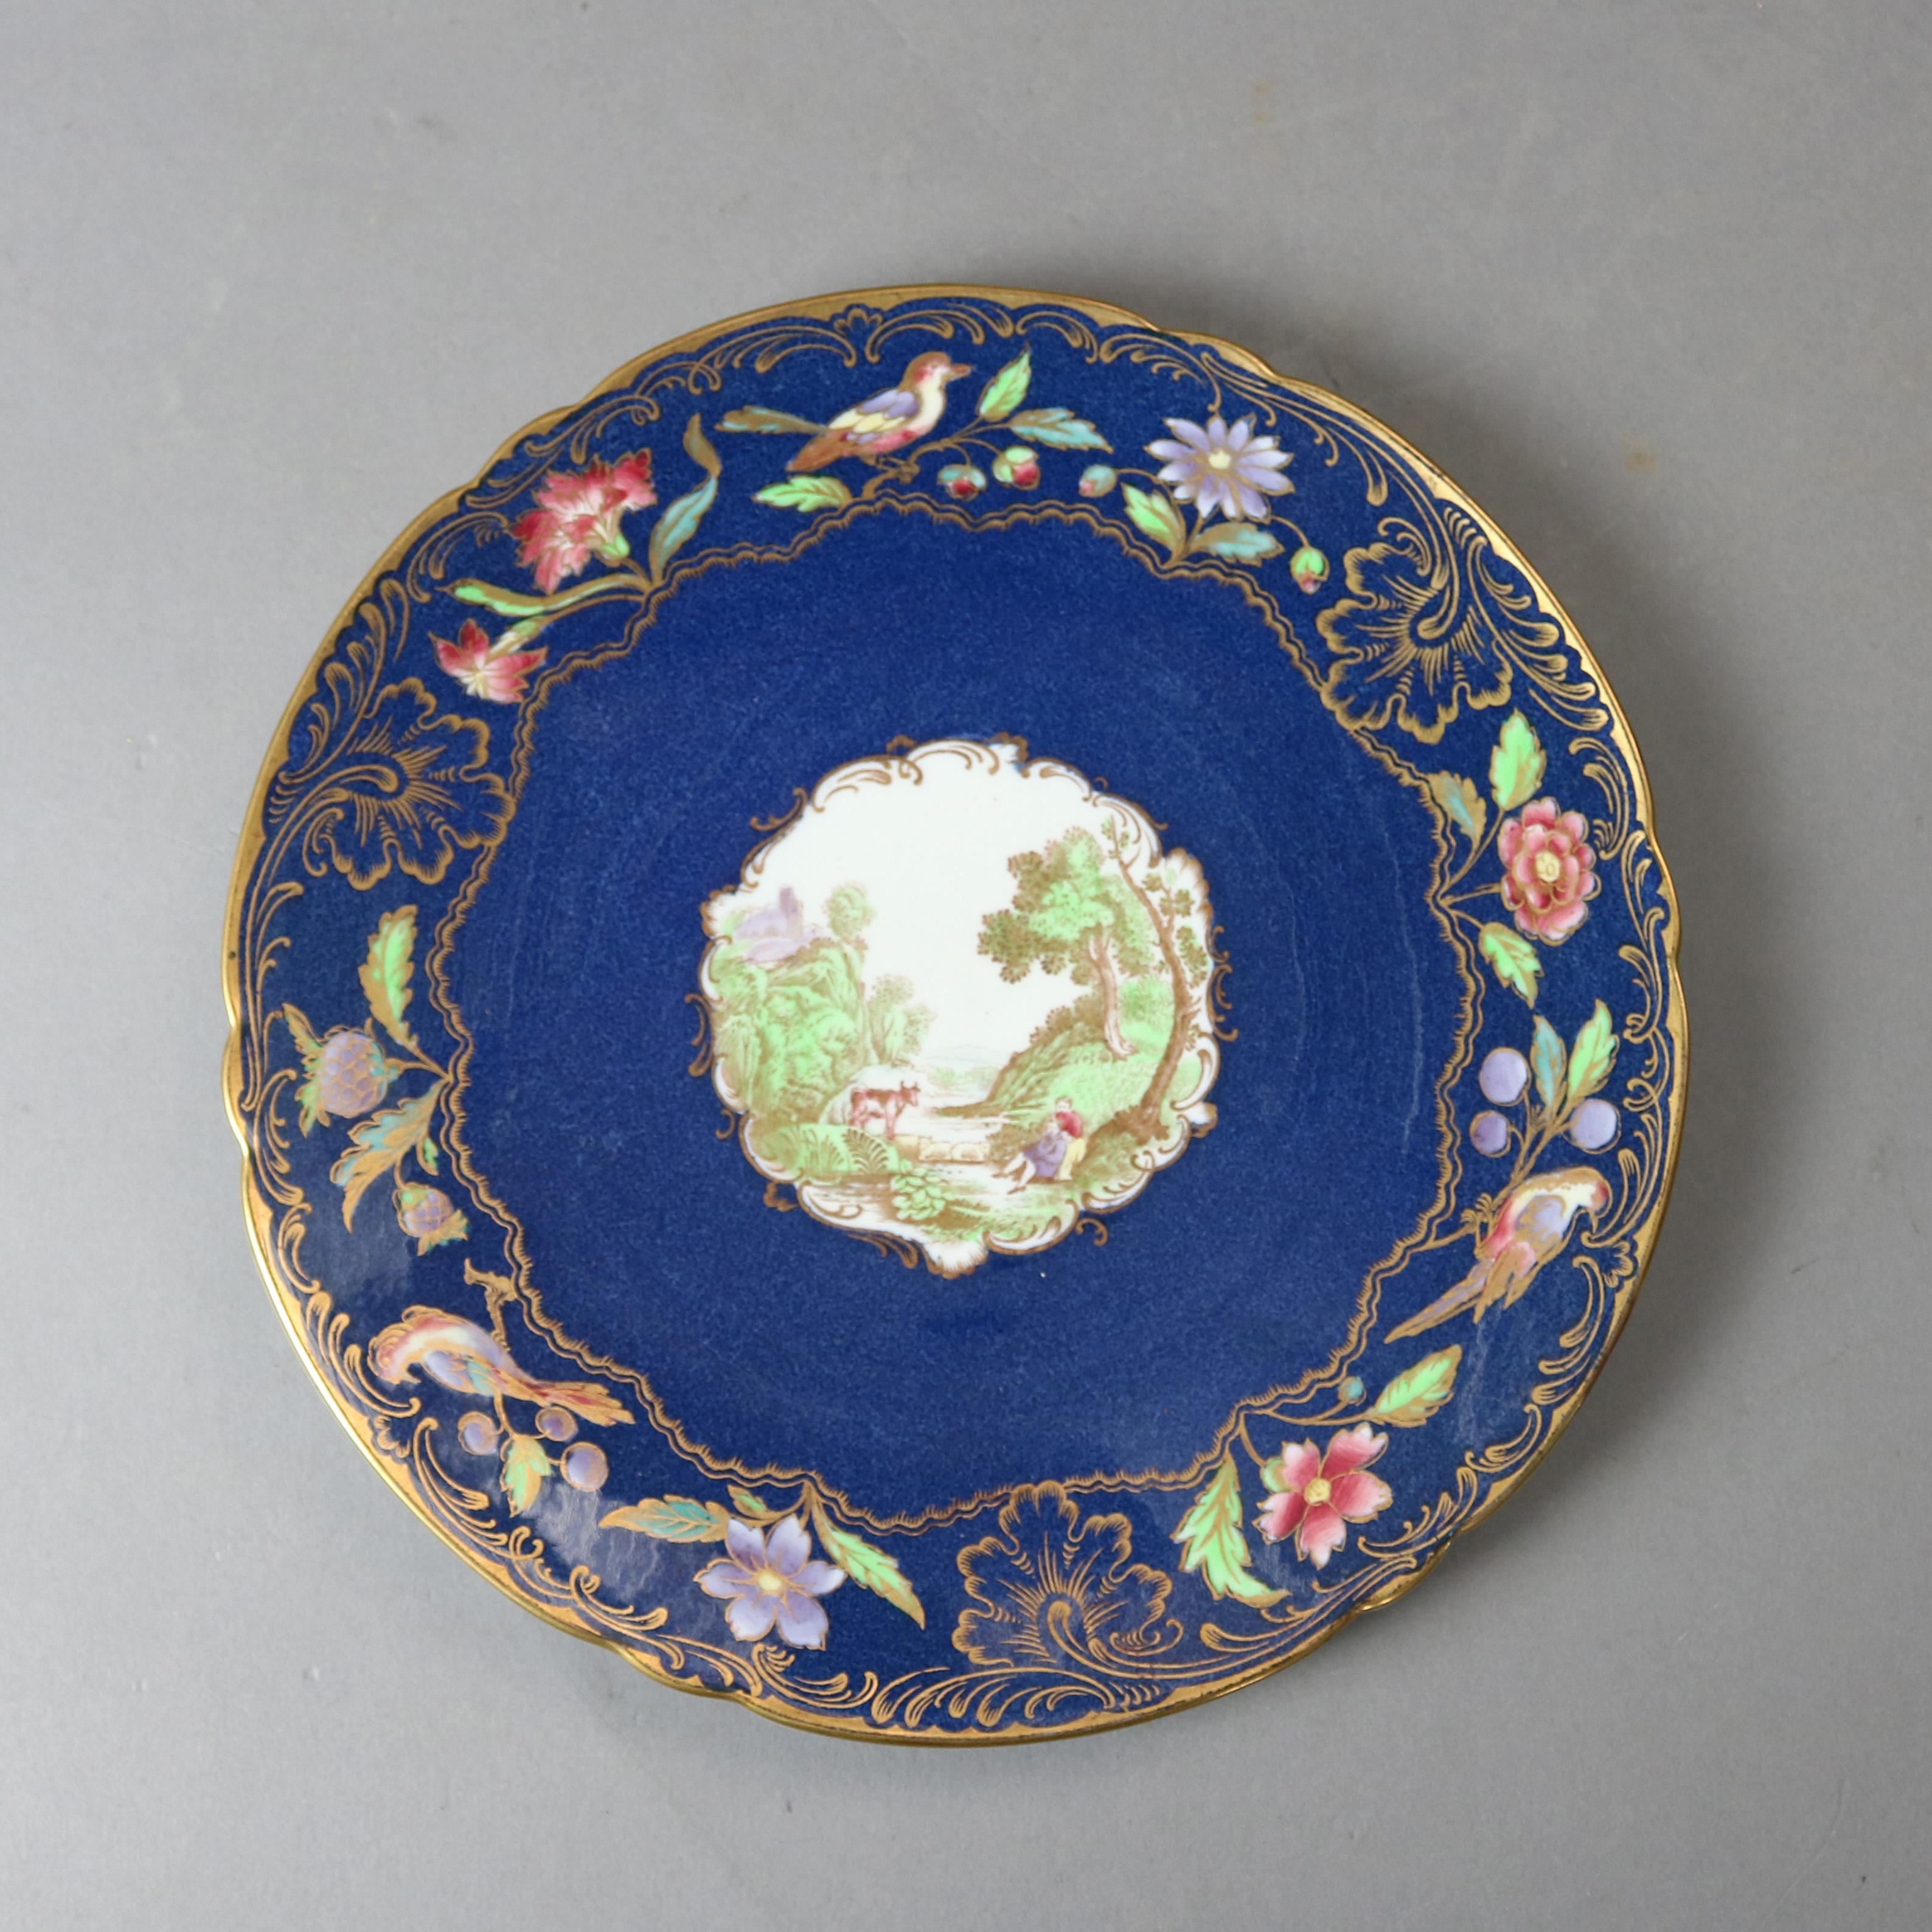 A set of 6 English Copeland Spode pictorial plates offer central reserve with Scottish Irish countryside scene with structure, cow, stream and courting couple on cobalt blue ground with gilt scroll and foliate decoration, en verso maker mark, 20th